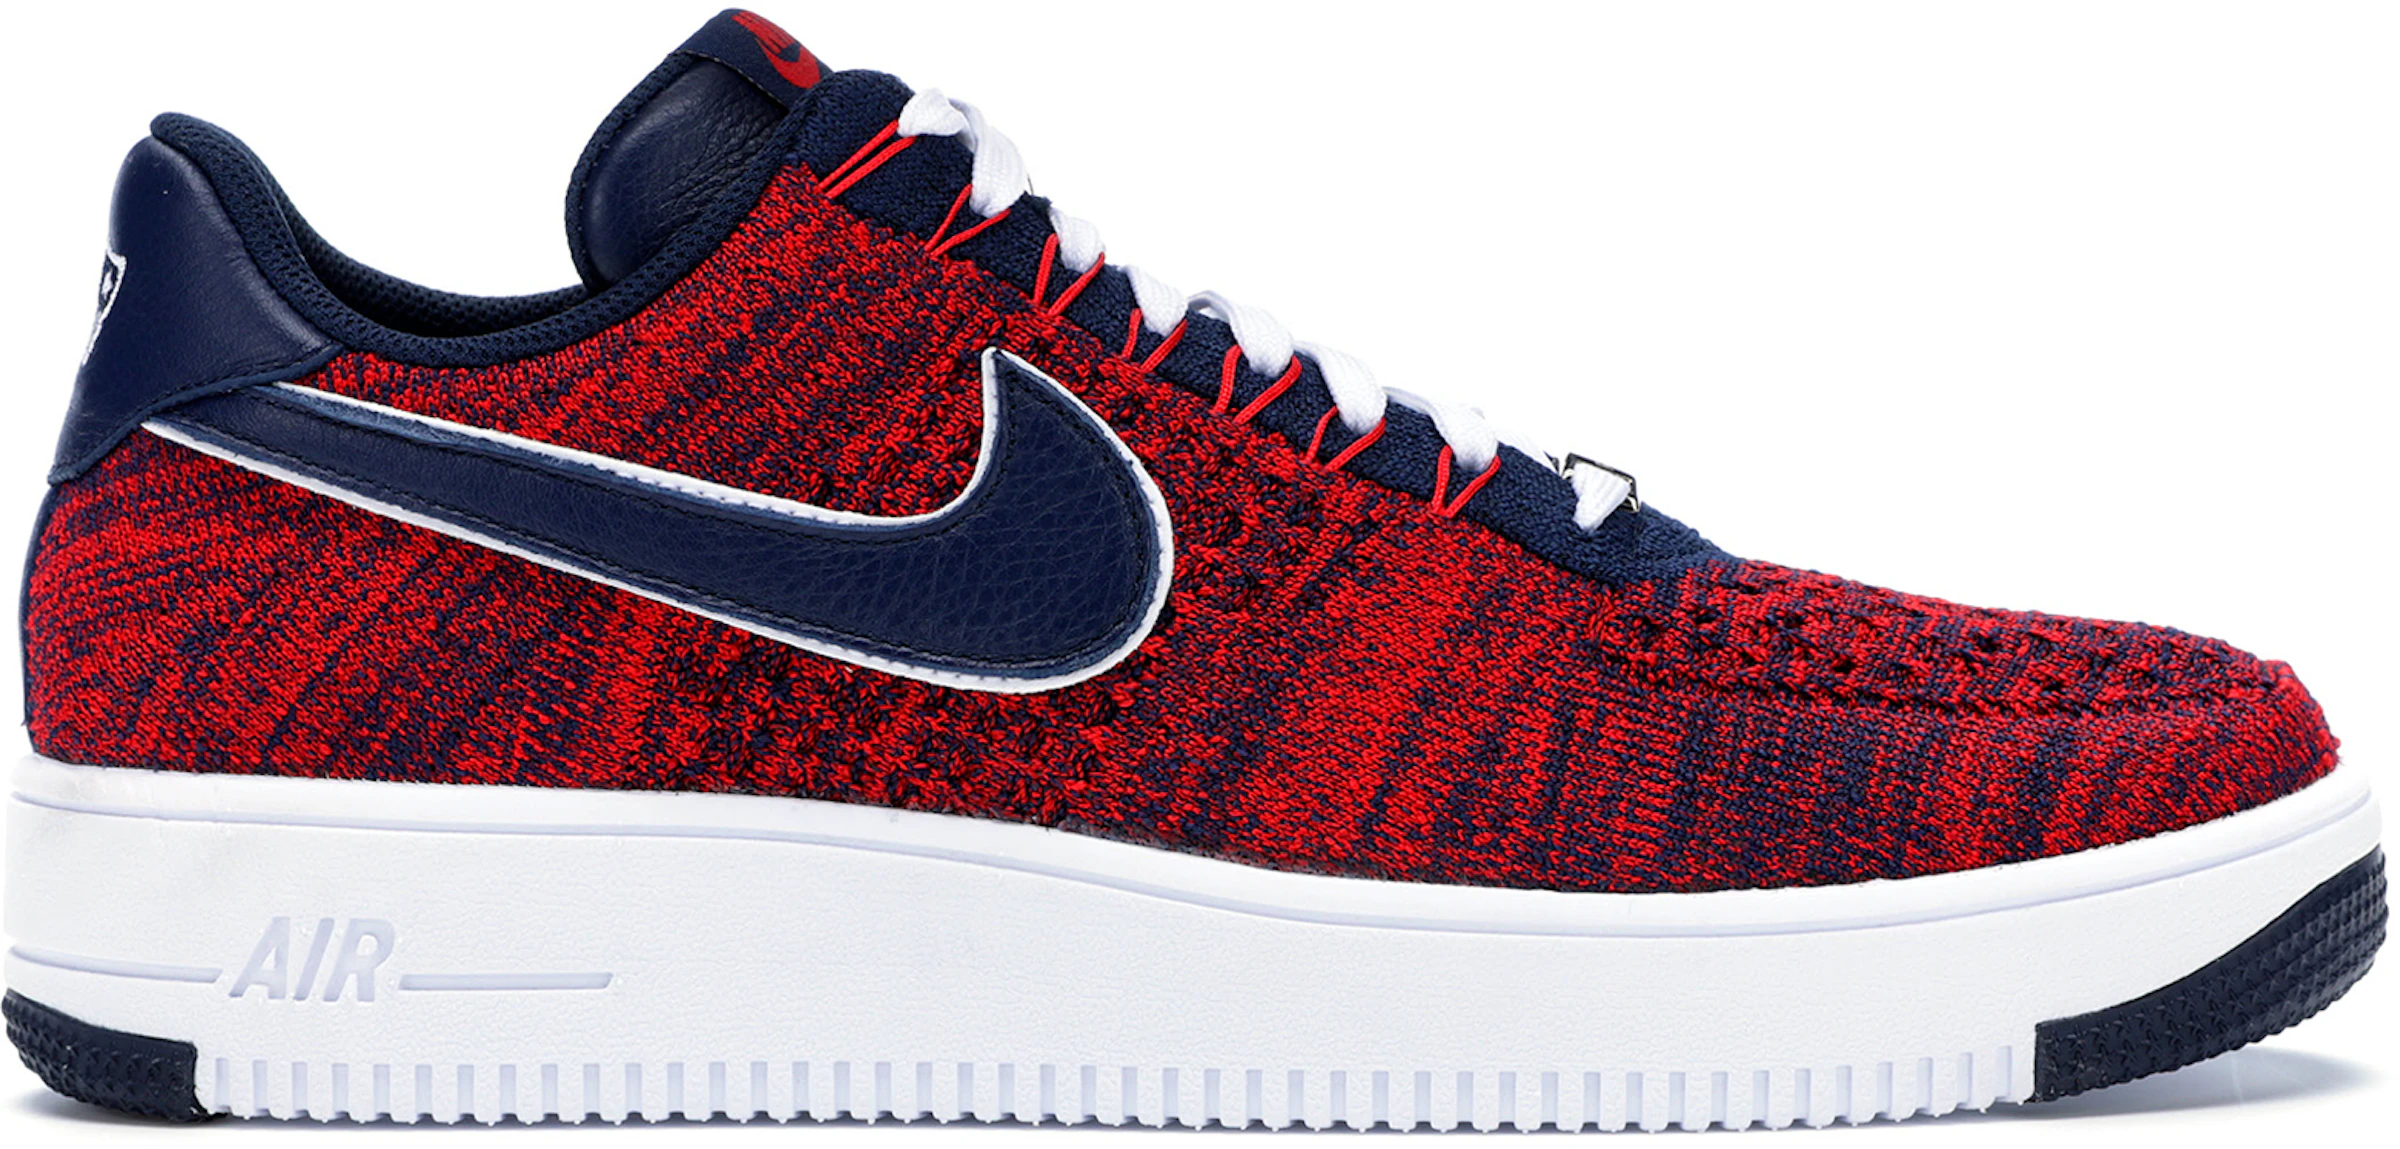 Nike Air Force 1 Ultra Flyknit Low RKK New England Patriots (2018) - -